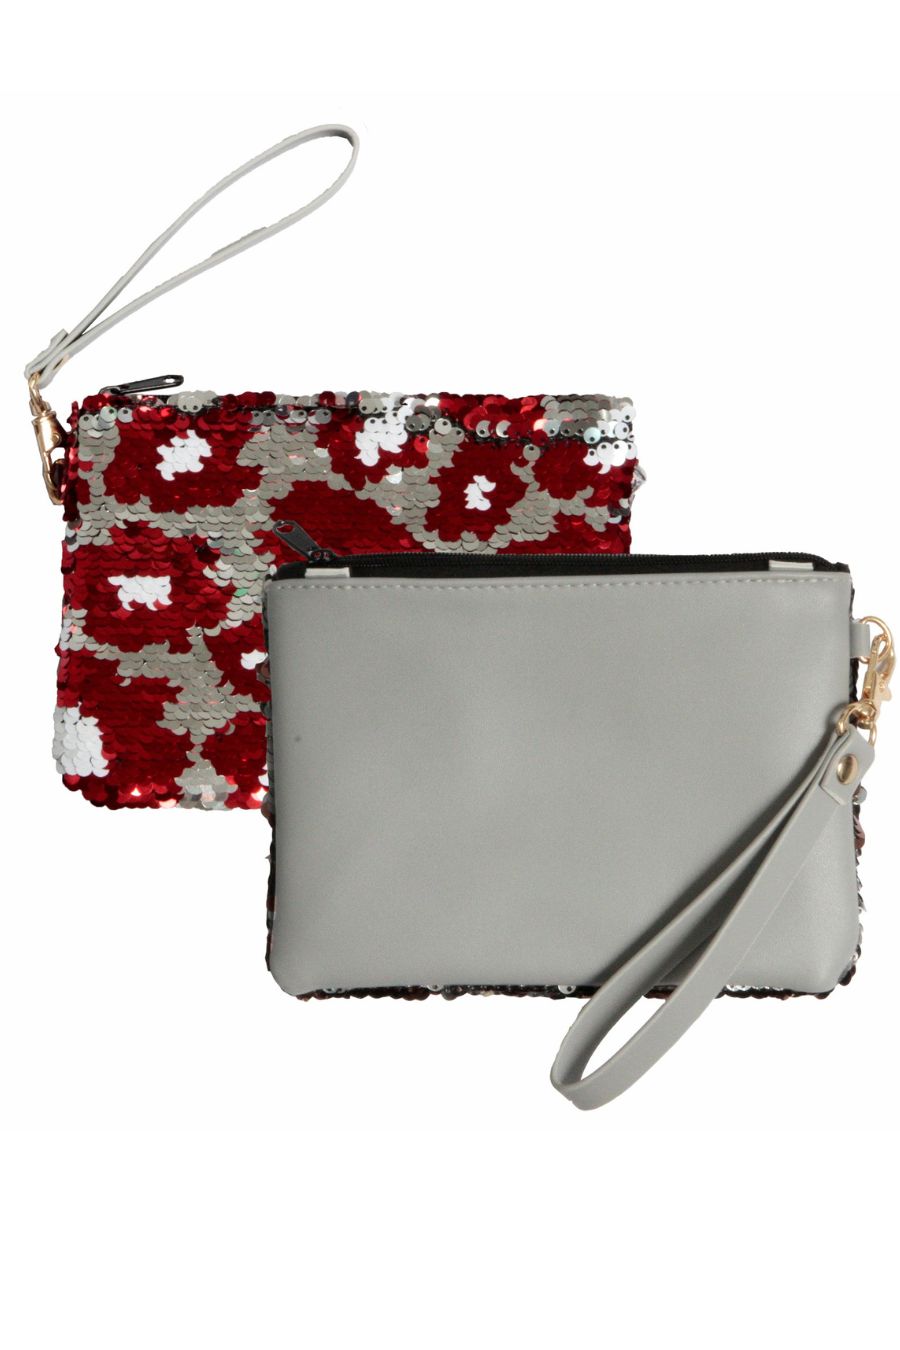 TOO CHIC REVERSIBLE SEQUIN WRISTLET IN CRIMSON AND SILVER